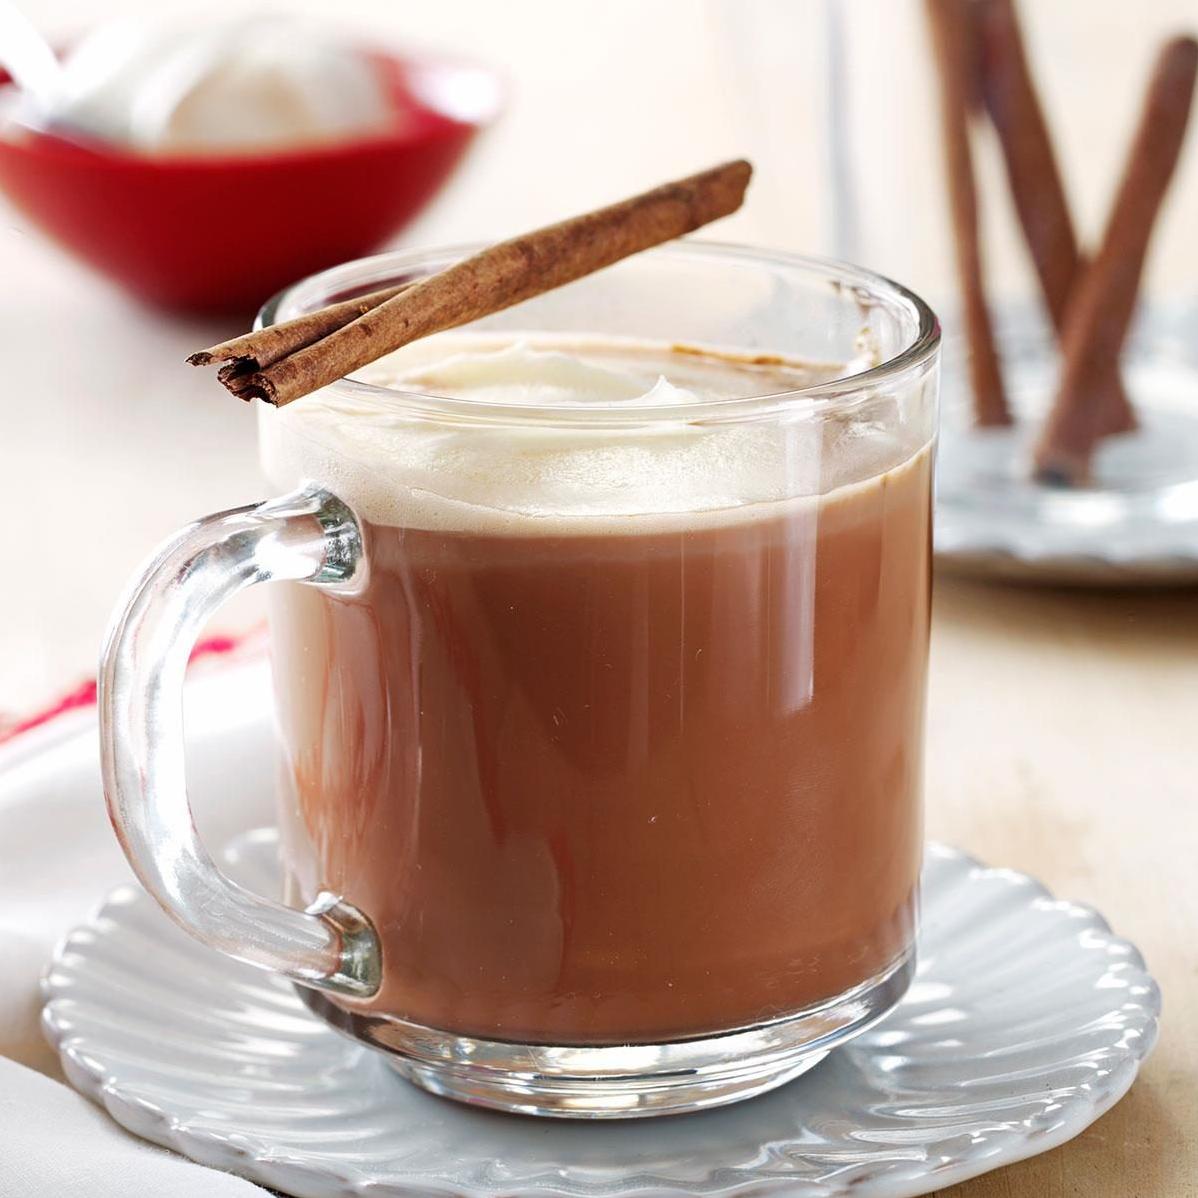  The perfect combination of coffee and cocoa with a hint of cinnamon